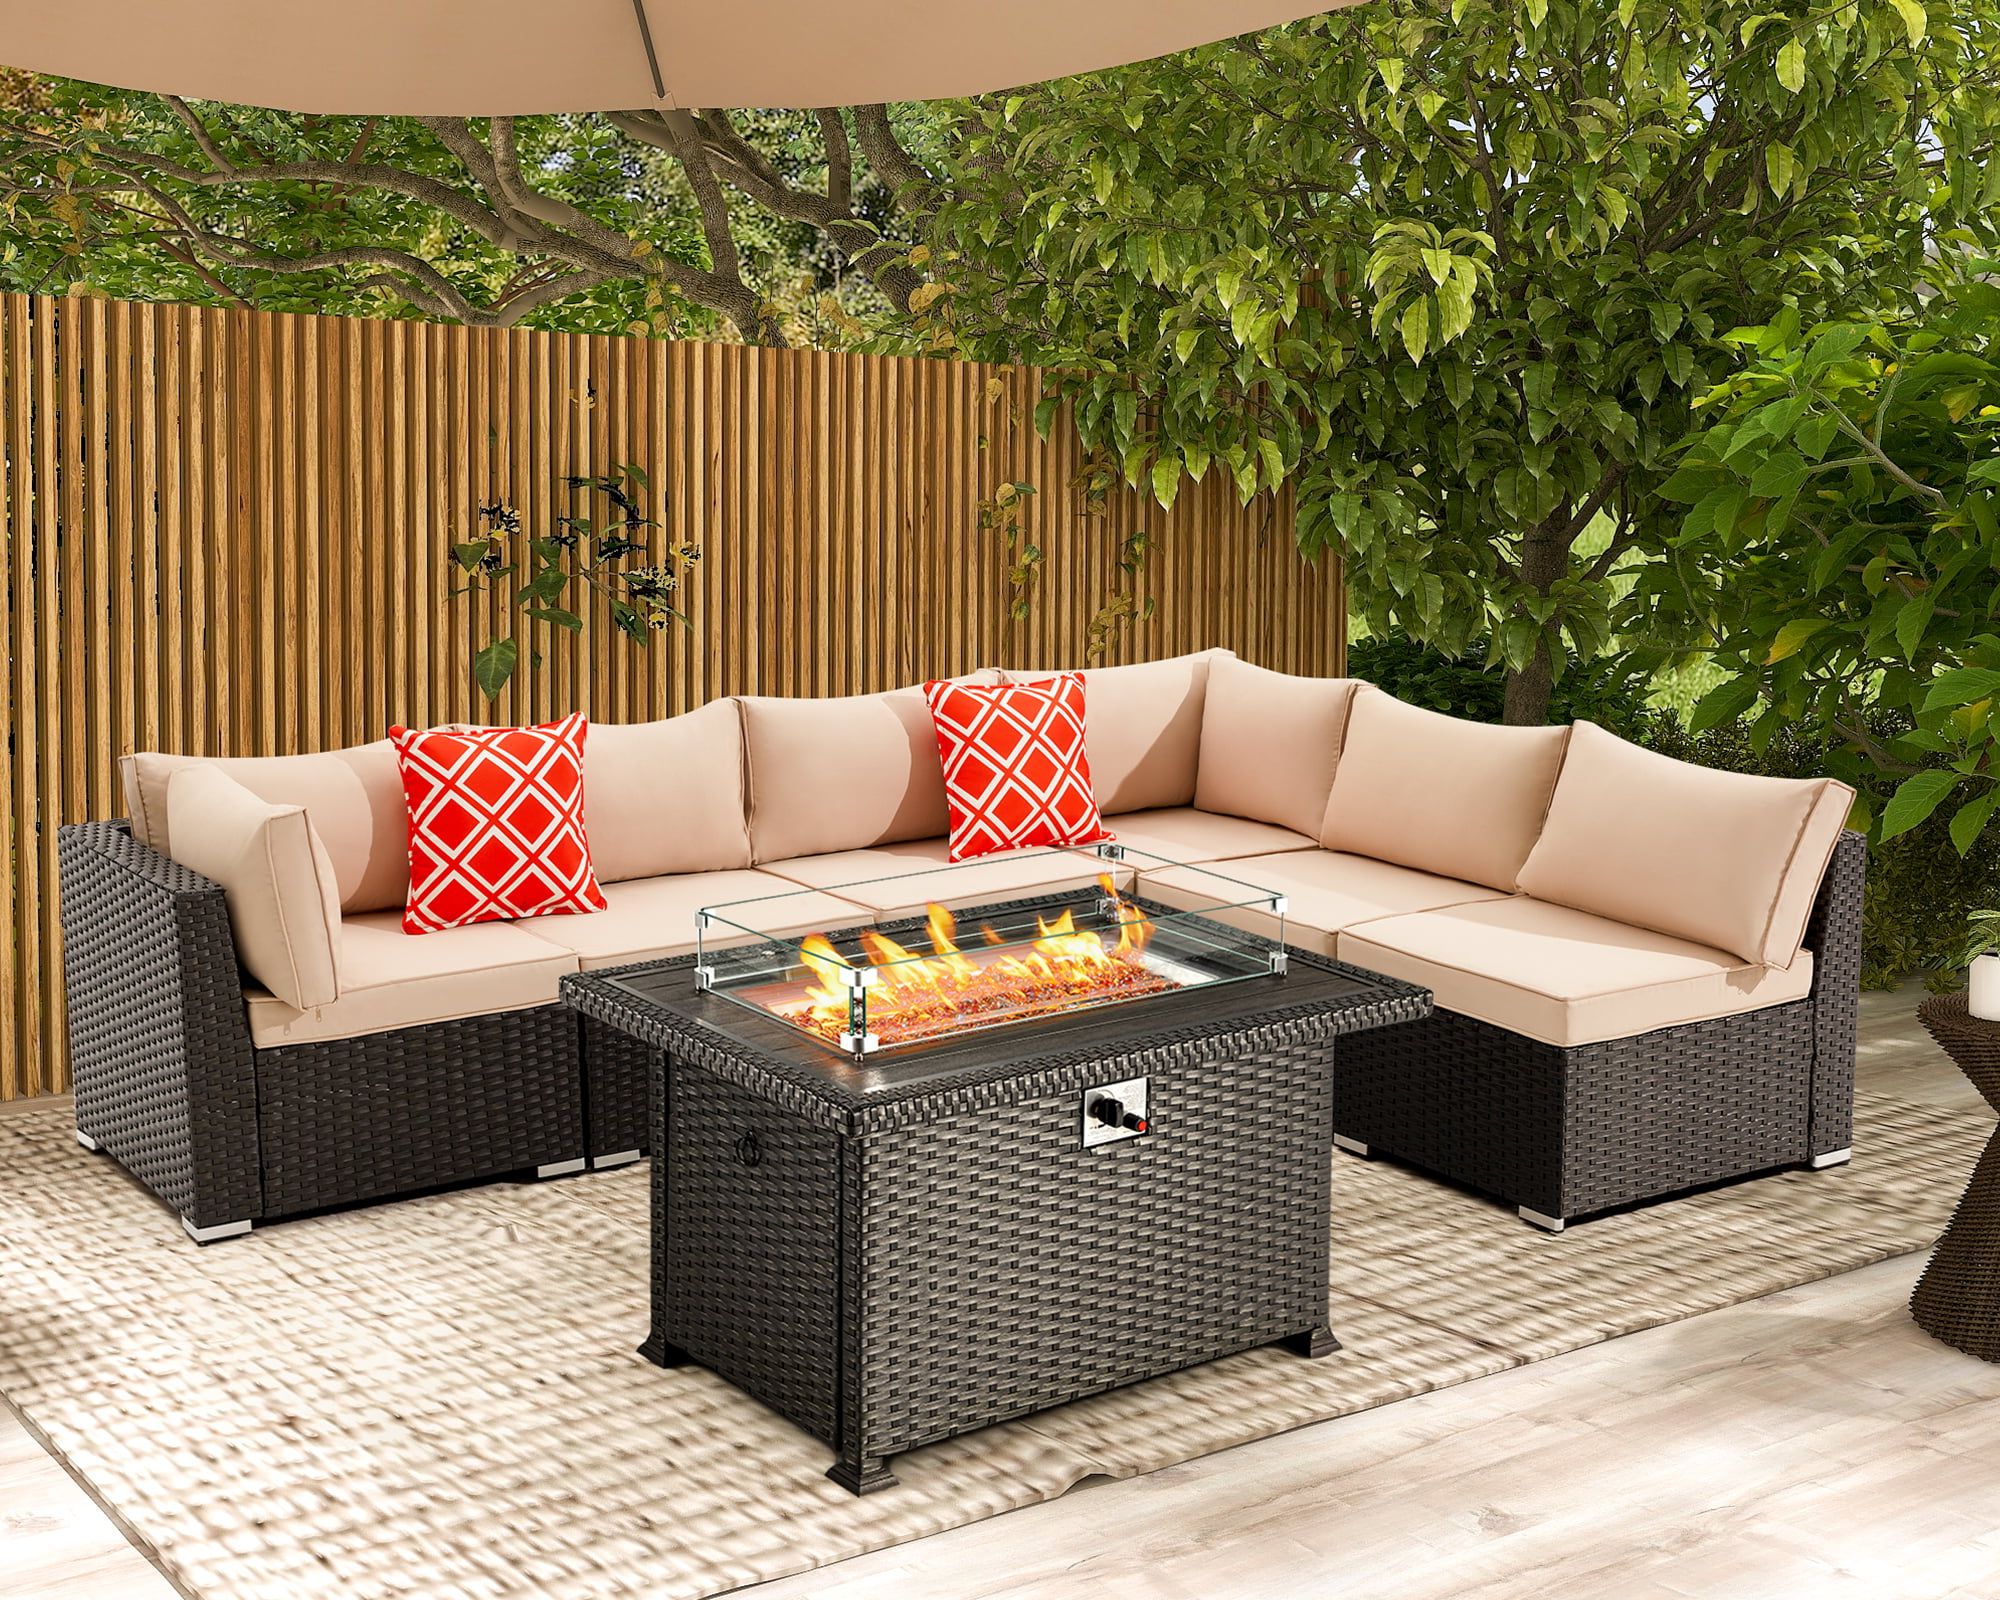 Hugiee 7 Pieces Patio Furniture Wicker Sofa Outdoor Sectional Sets With  44 Inch 50,000 Btu Gas Fire Pit Table Auto Ignition Propane Fire Pit Table,  Khaki – Walmart With Famous Fire Pit Table Wicker Sectional Sofa Conversation Set (Photo 2 of 15)